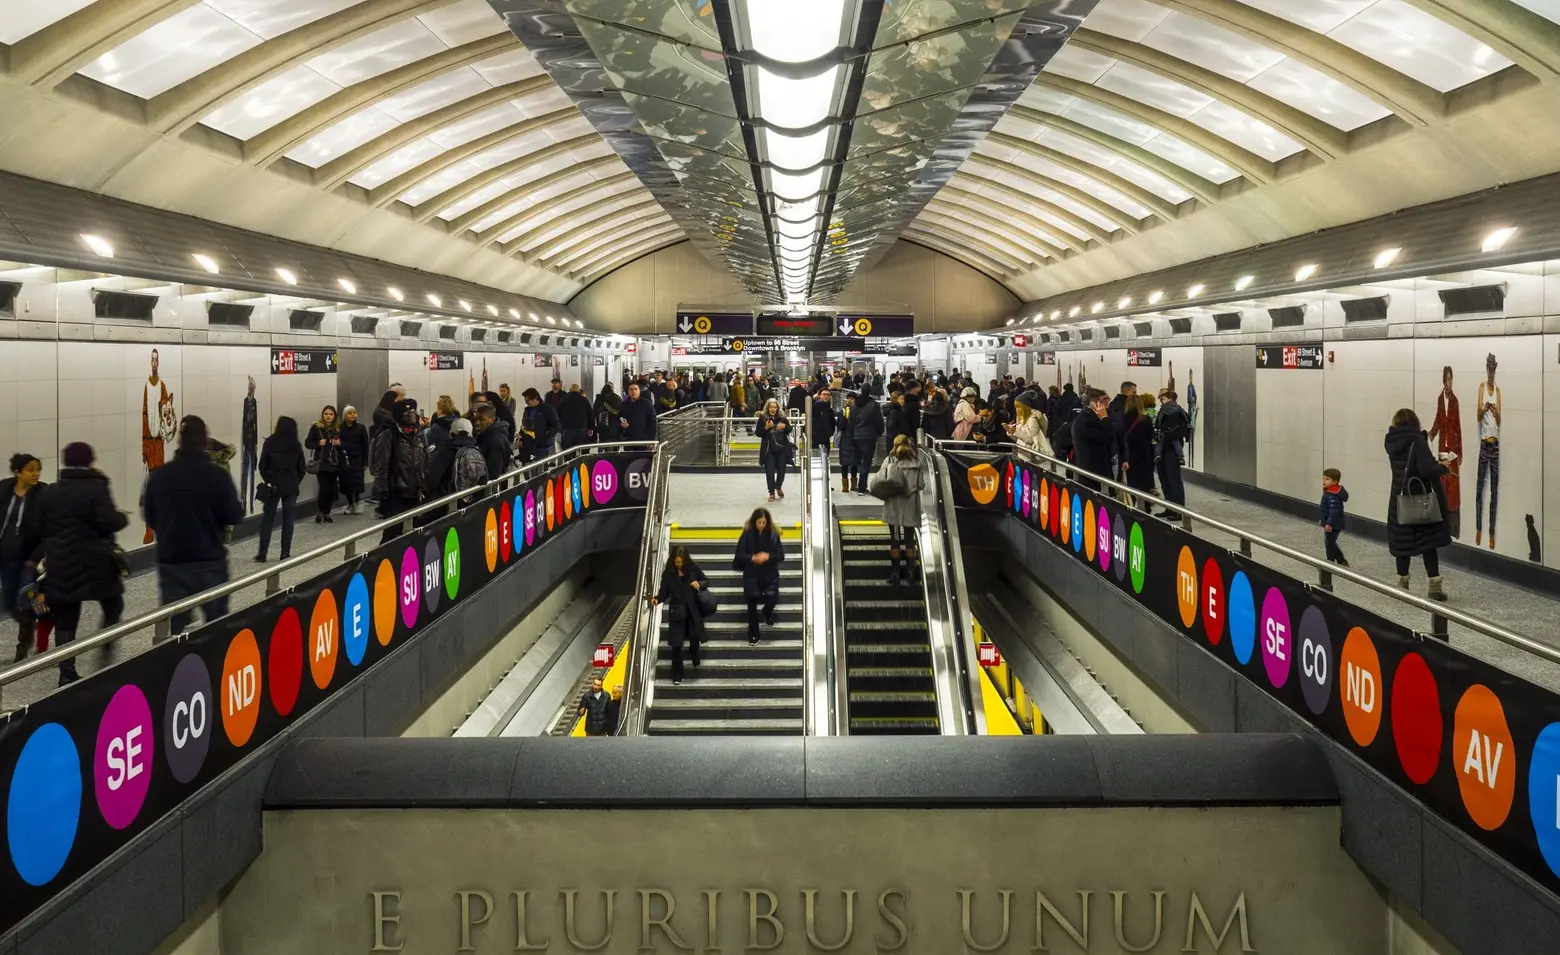 With key environmental approval, Second Avenue Subway’s second phase inches forward